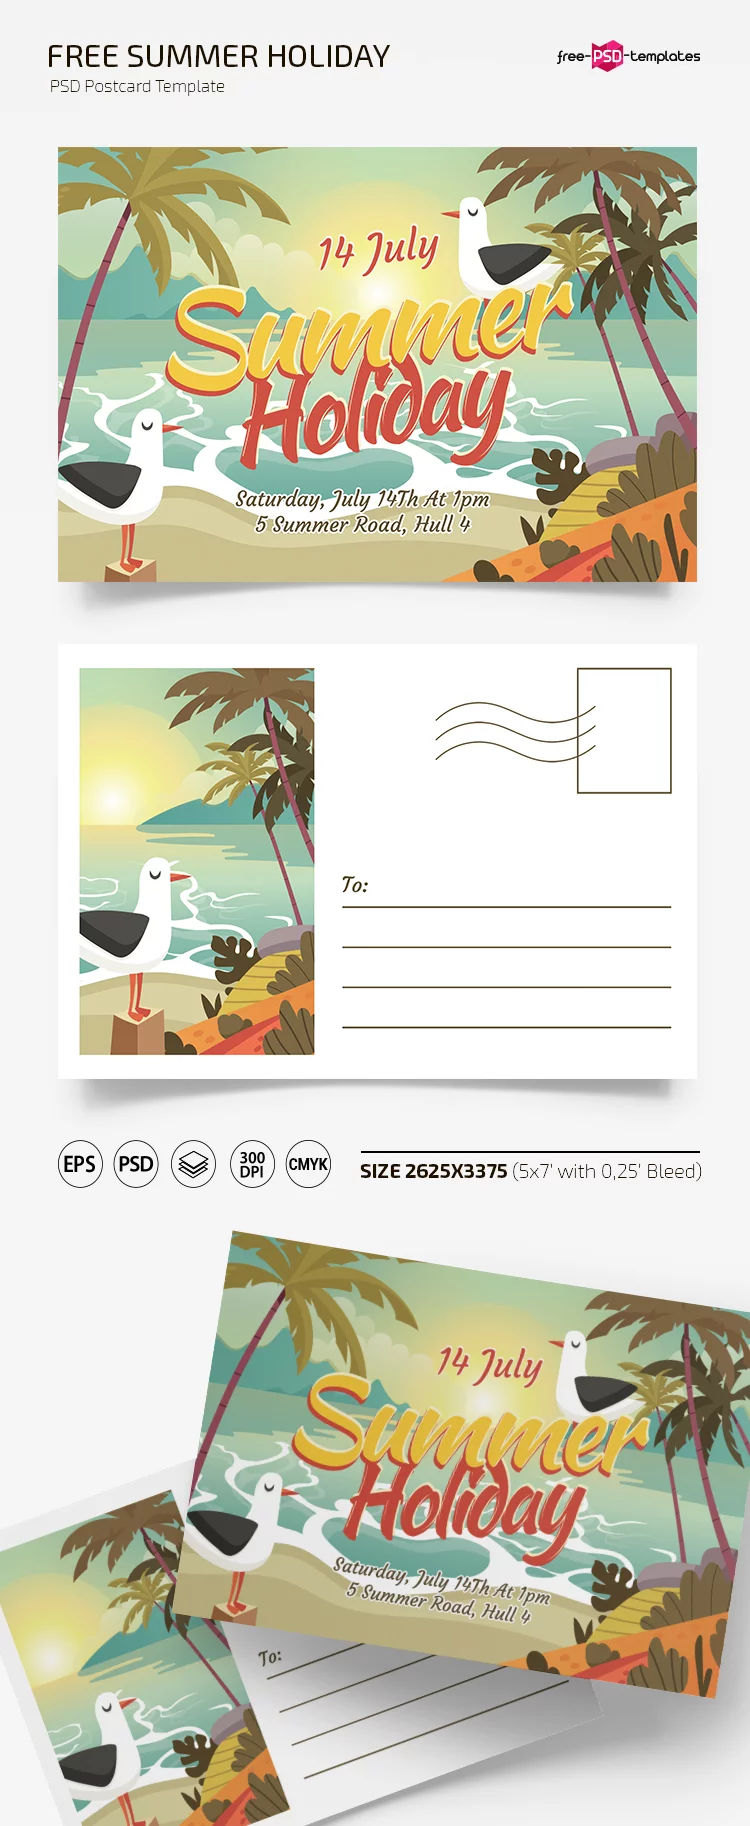 Free Summer Holiday Postcard Templates in PSD + EPS